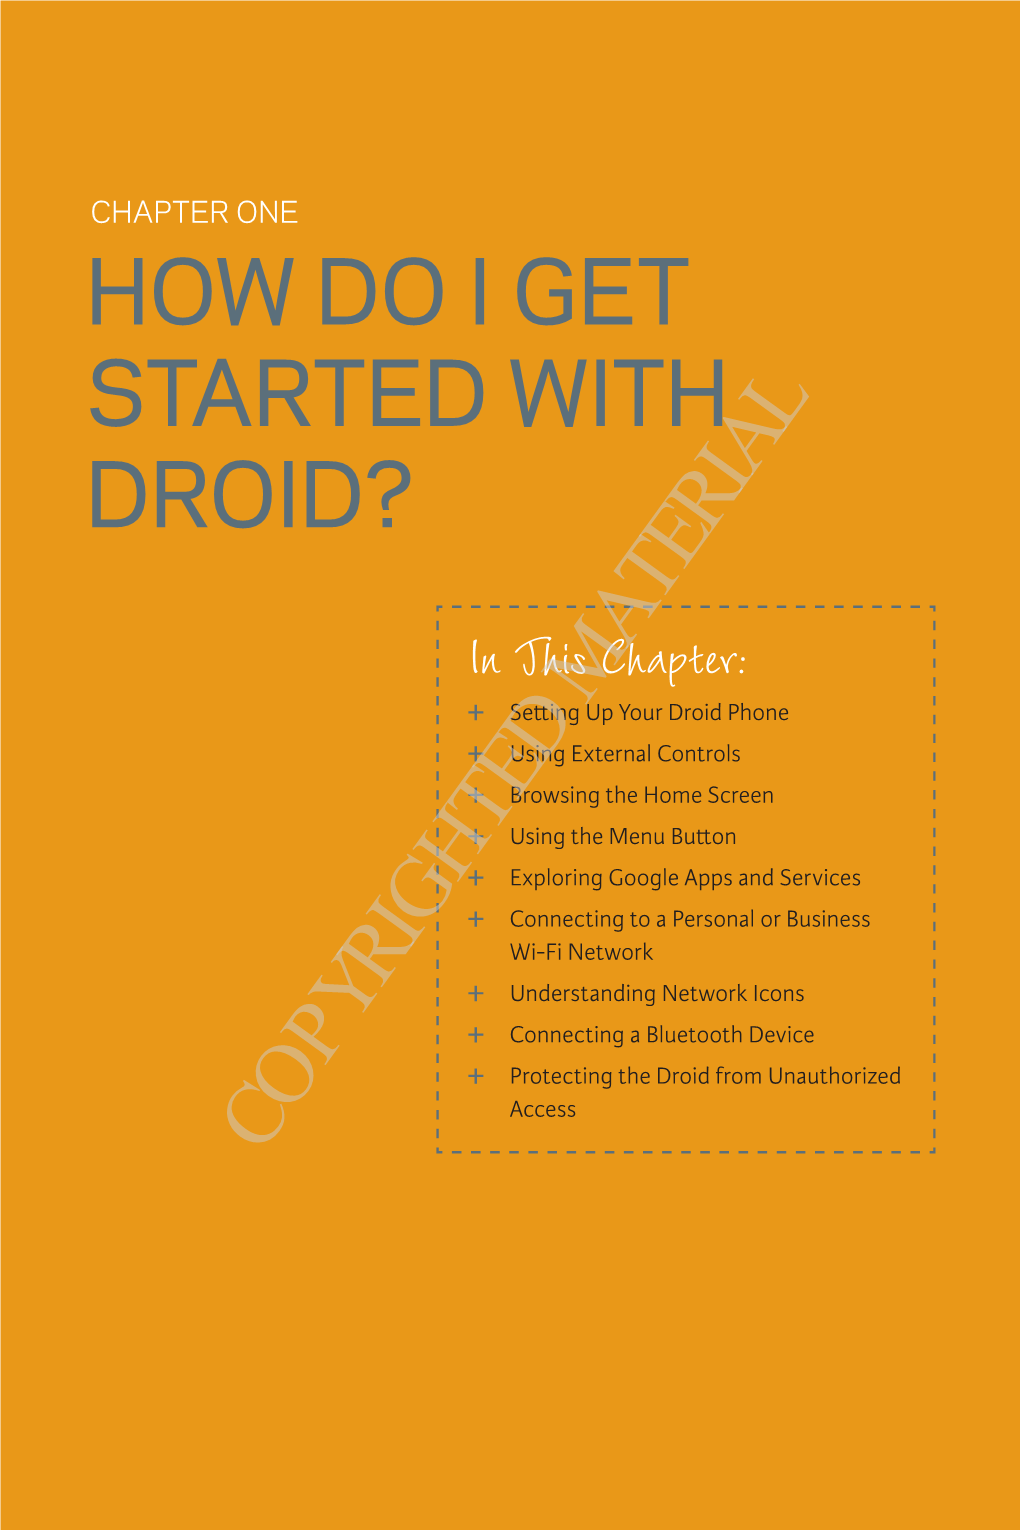 How Do I Get Started with Droid?